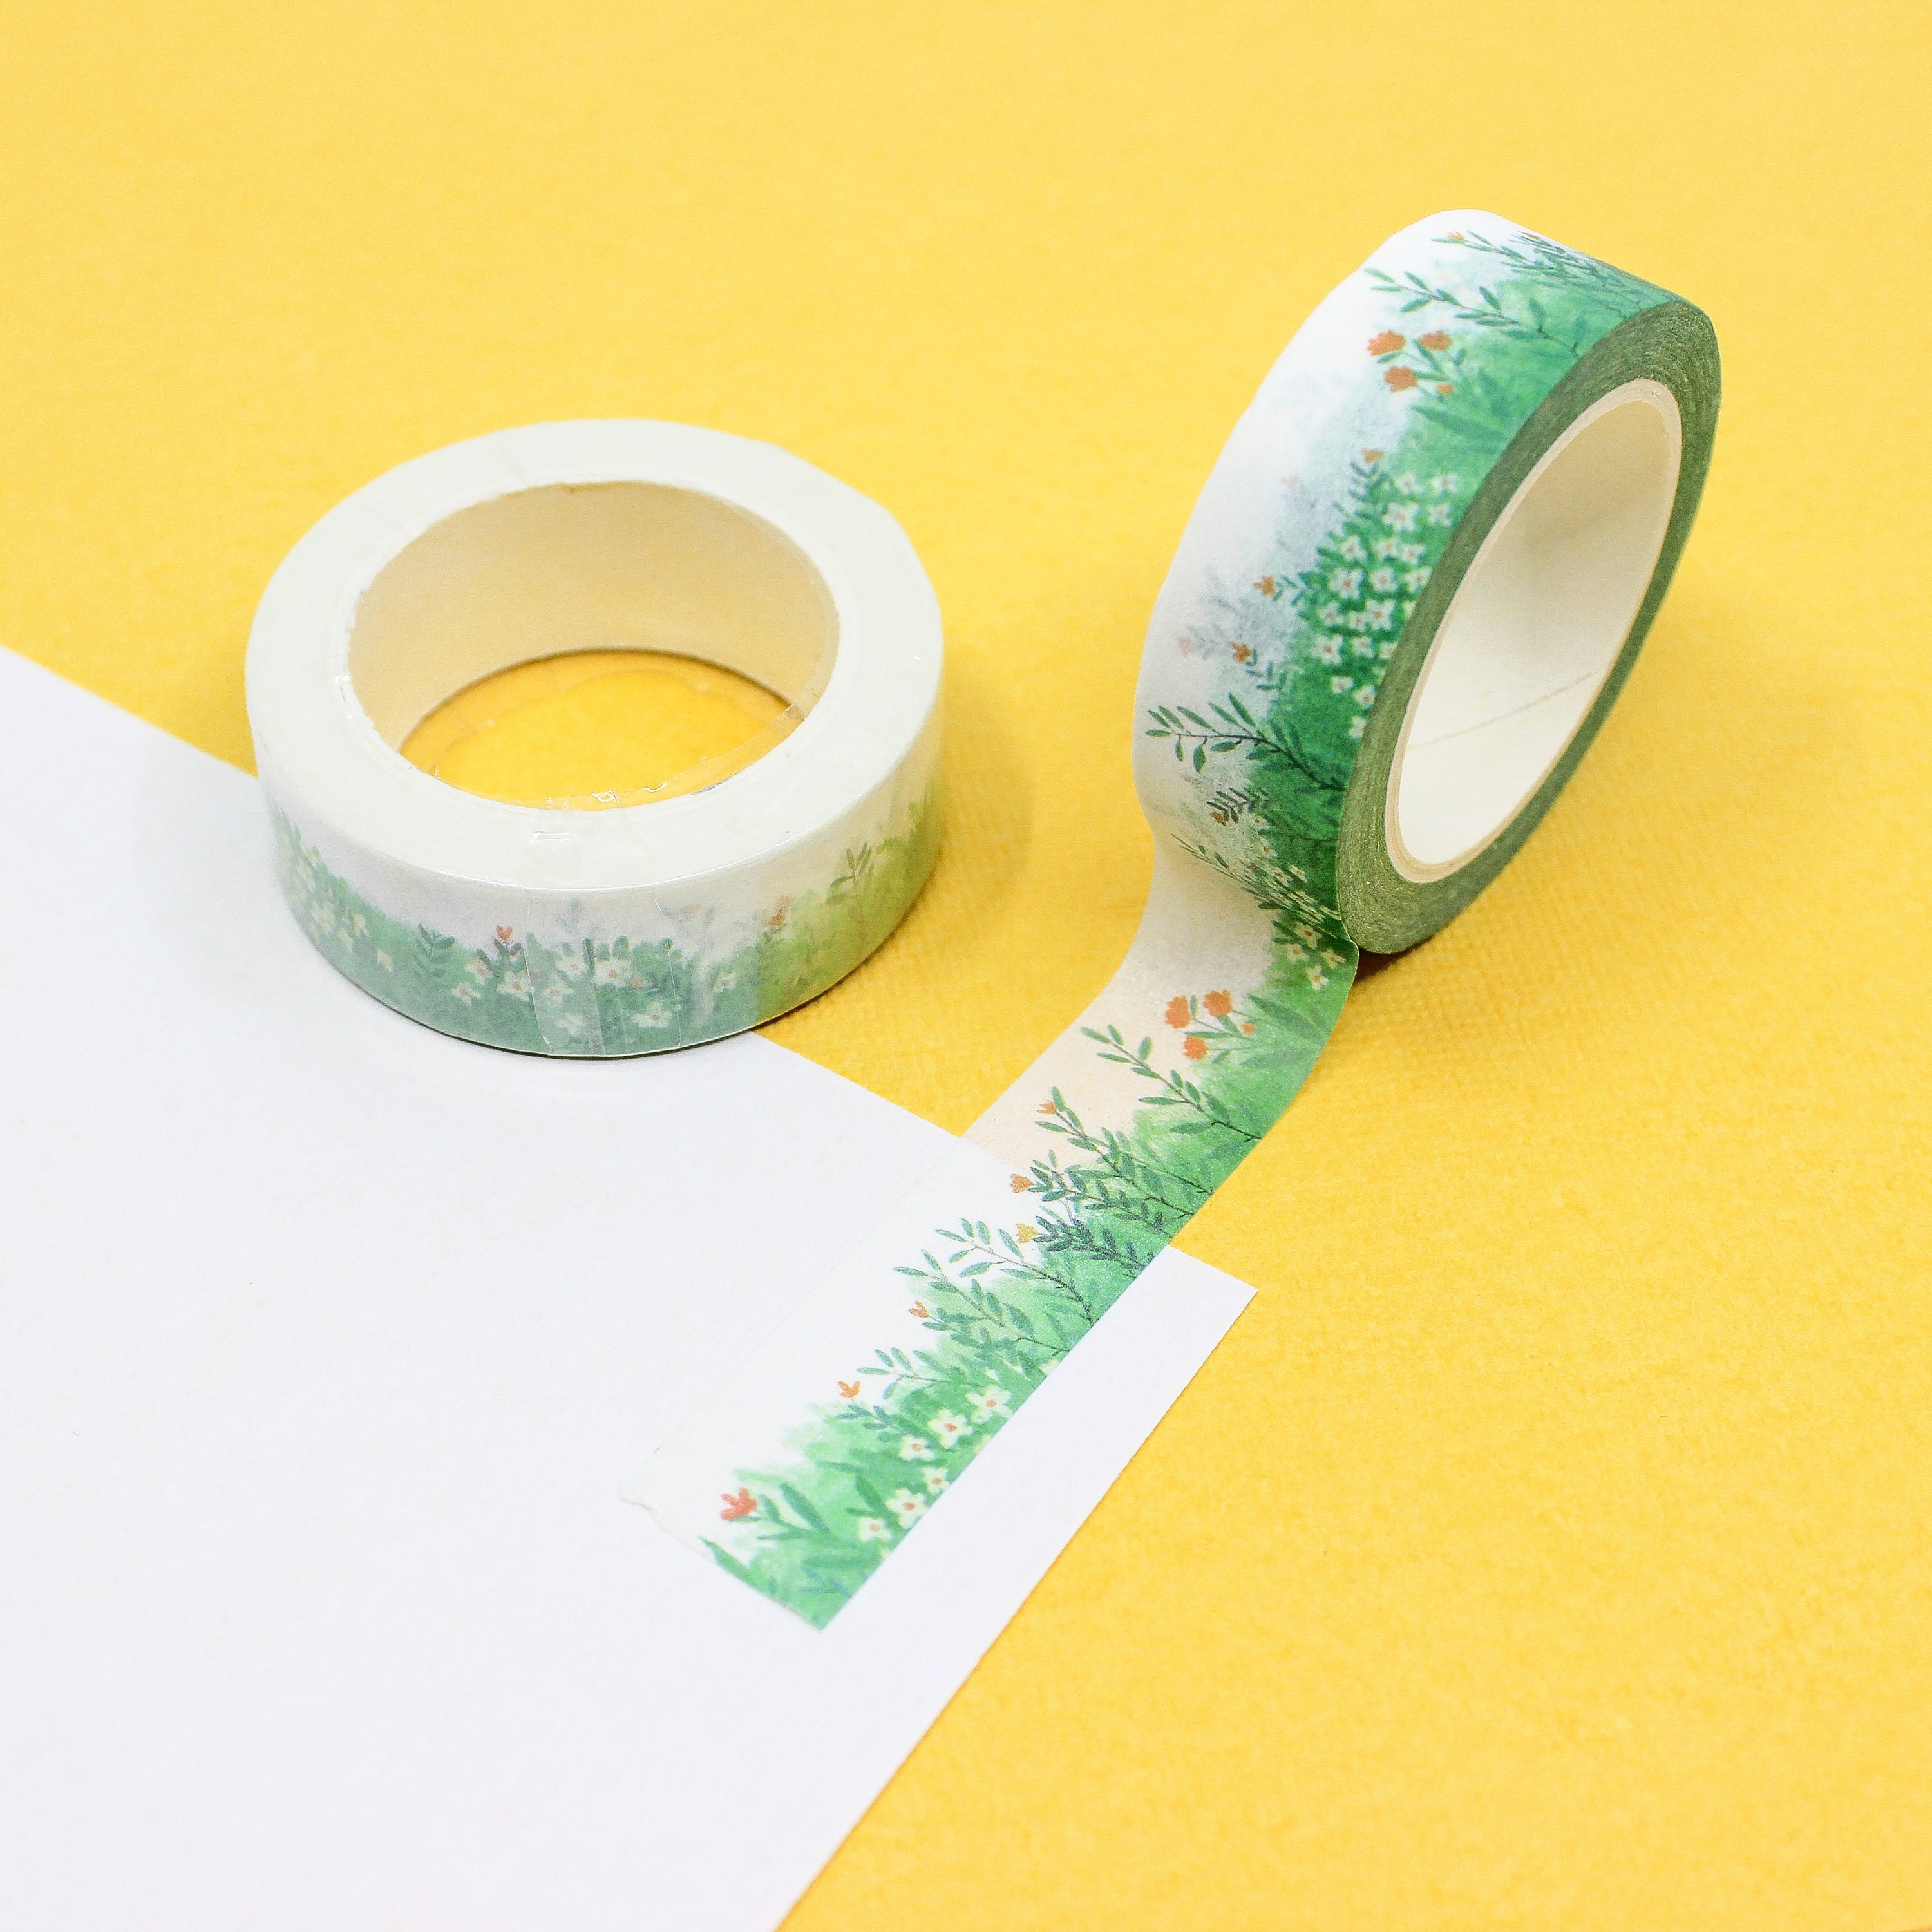 48 Rolls Washi Tape Set - 8mm Wide Decorative Masking Tape, Colorful Flower  Style Design for DIY Craft Scrapbooking Gift Wrapping